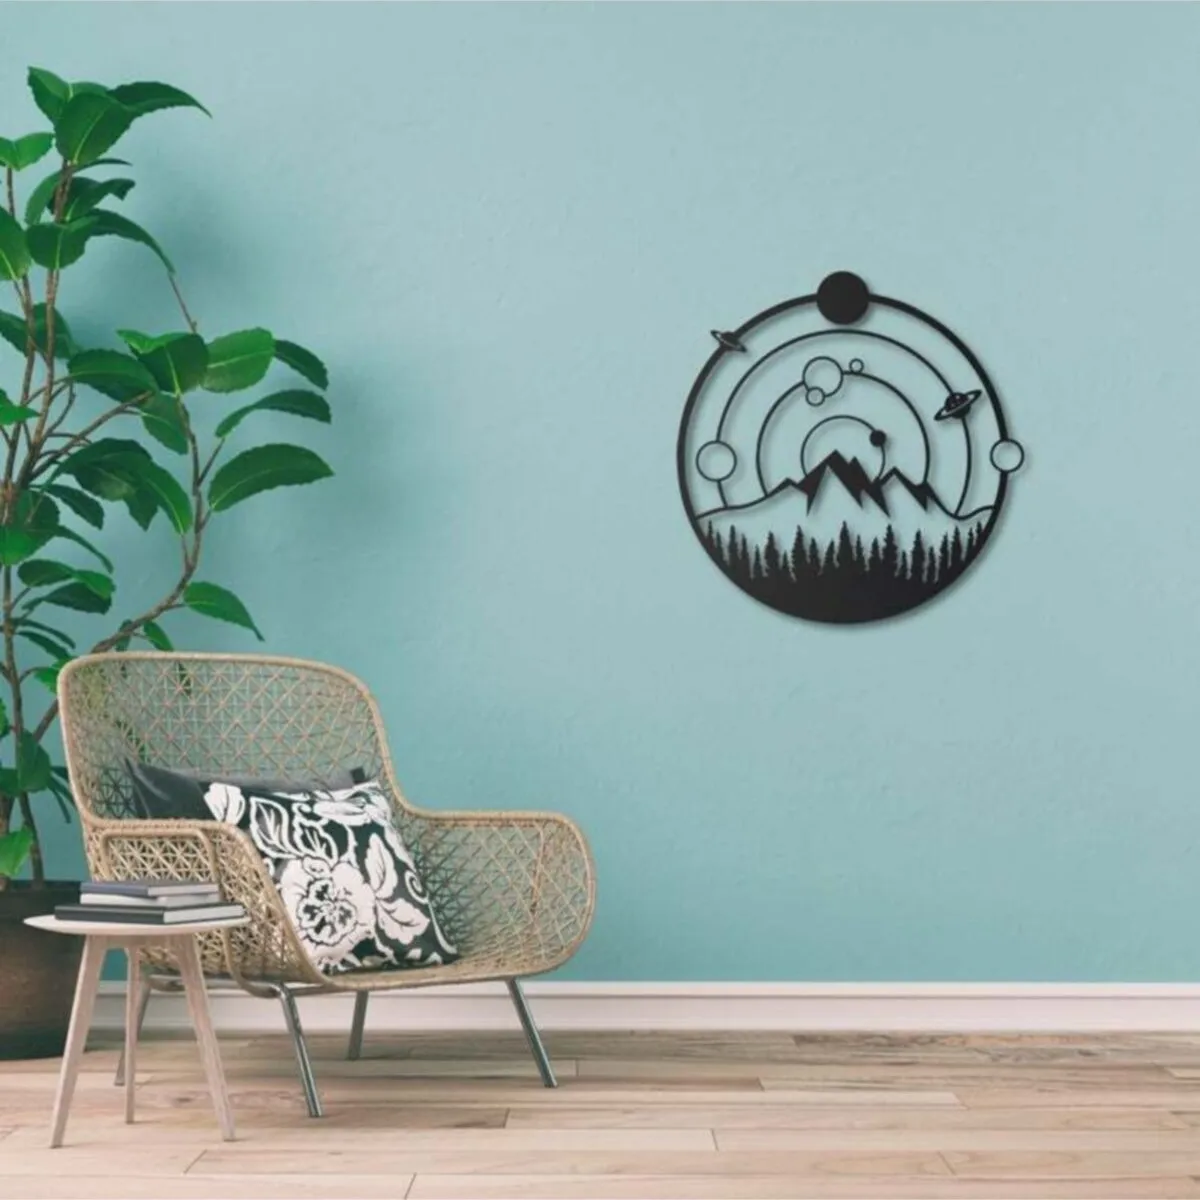 

Planets Wall Decor Ornament Laser Cut mdf Wooden Decorative Painting science space black modern home art classic beautiful new